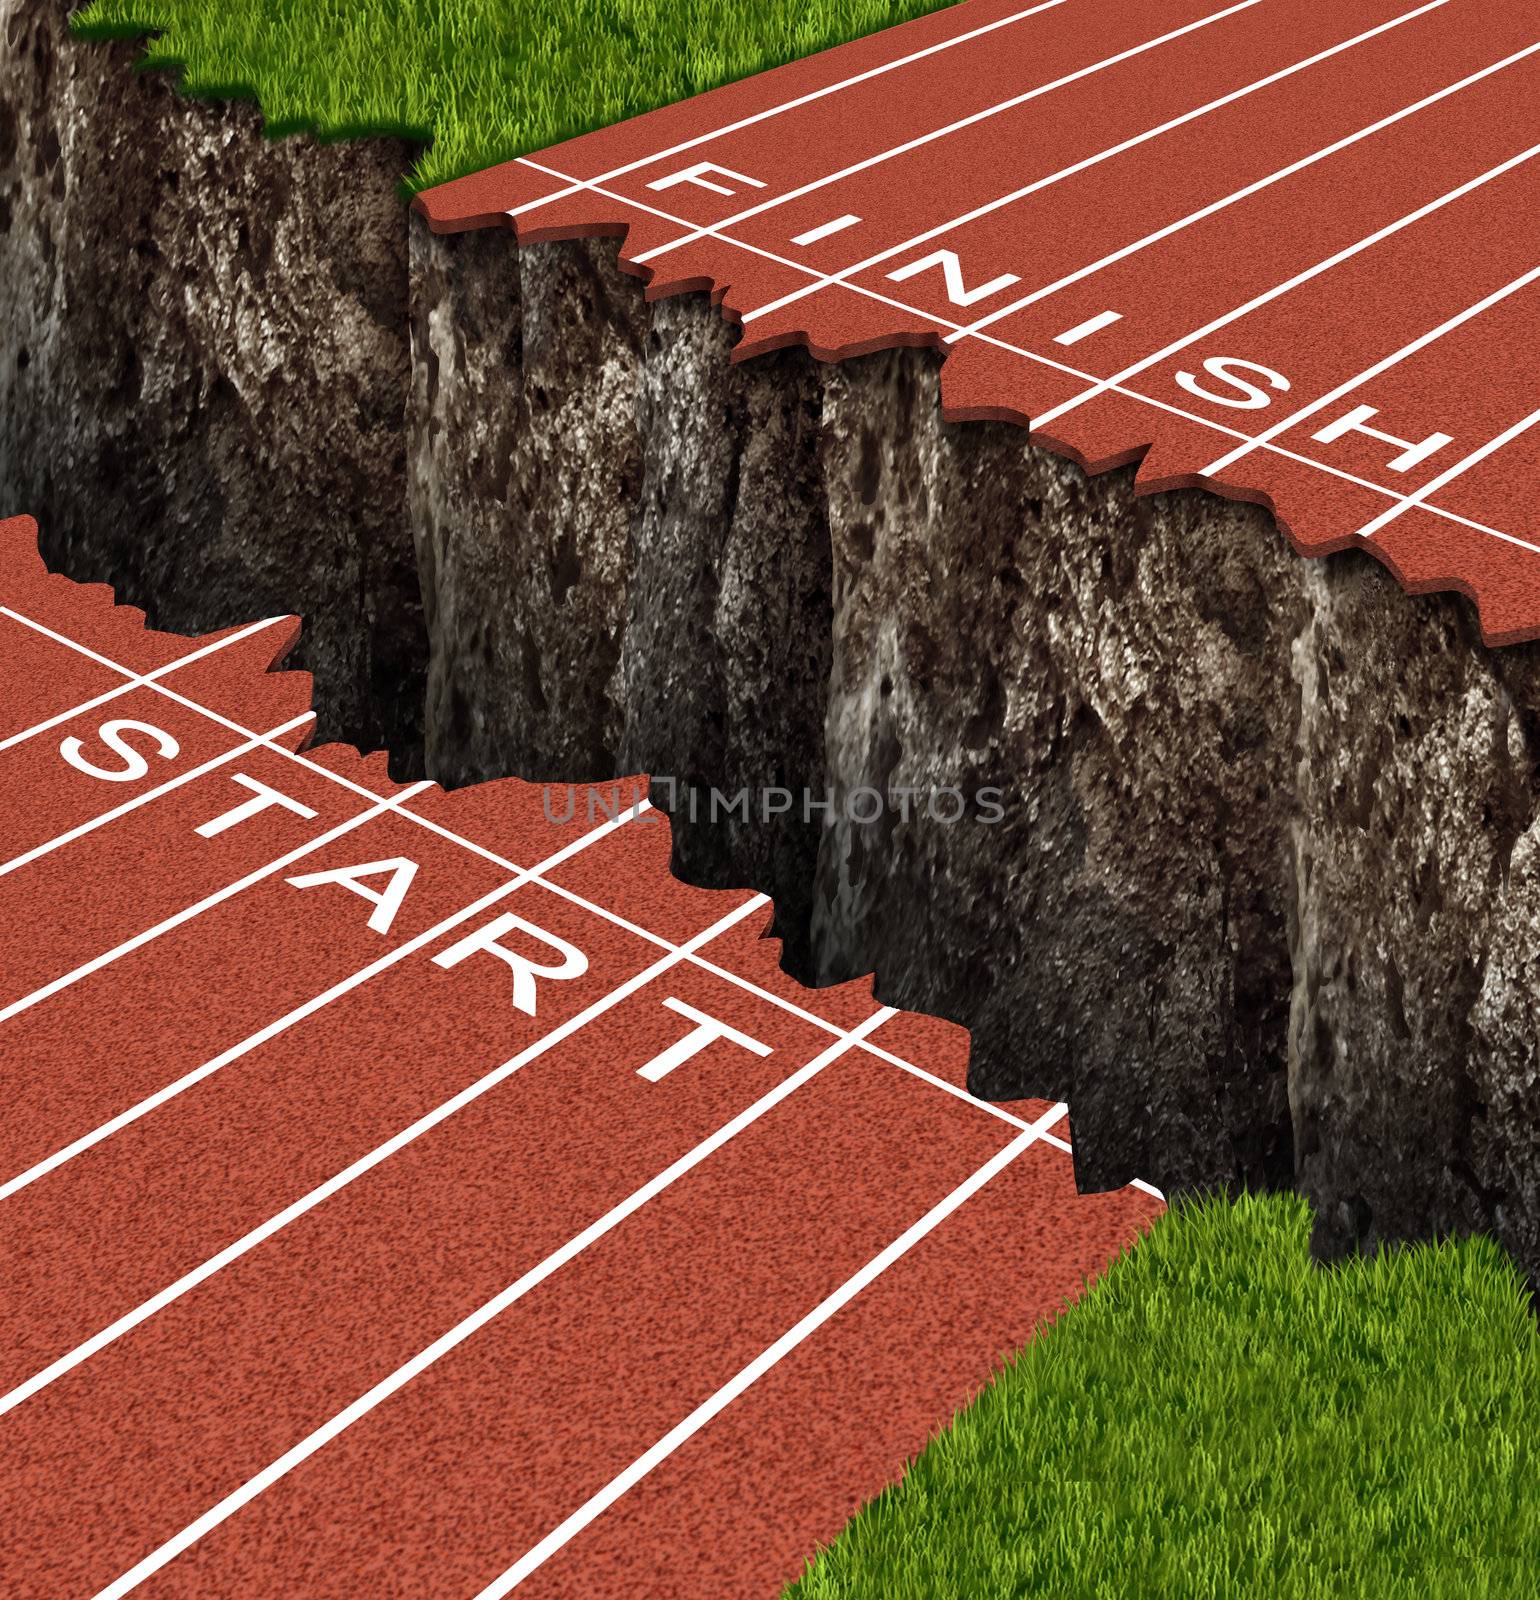 Success Risk and conquering adversity in reaching your goals as a business concept represented by a track and field race track with start and finish lines seperated by a deep and dangerous rock cliff.